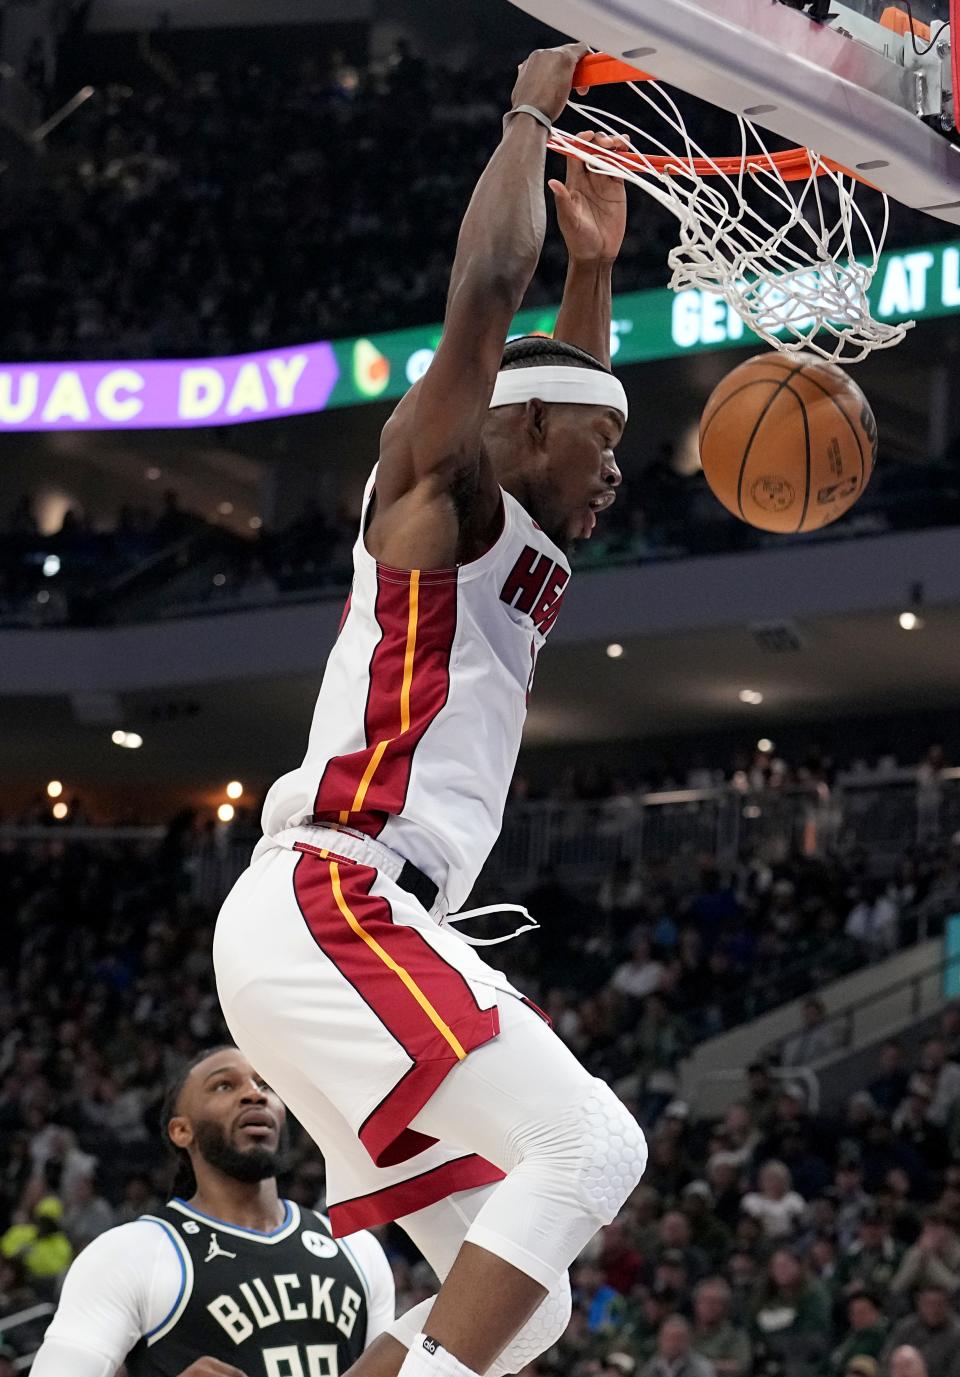 Miami Heat forward Jimmy Butler (22) dunks the ball during the first half of their game Sunday, April 16, 2023 at Fiserv Forum in Milwaukee, Wis. The Miami Heat beat the Milwaukee Bucks 130-117.